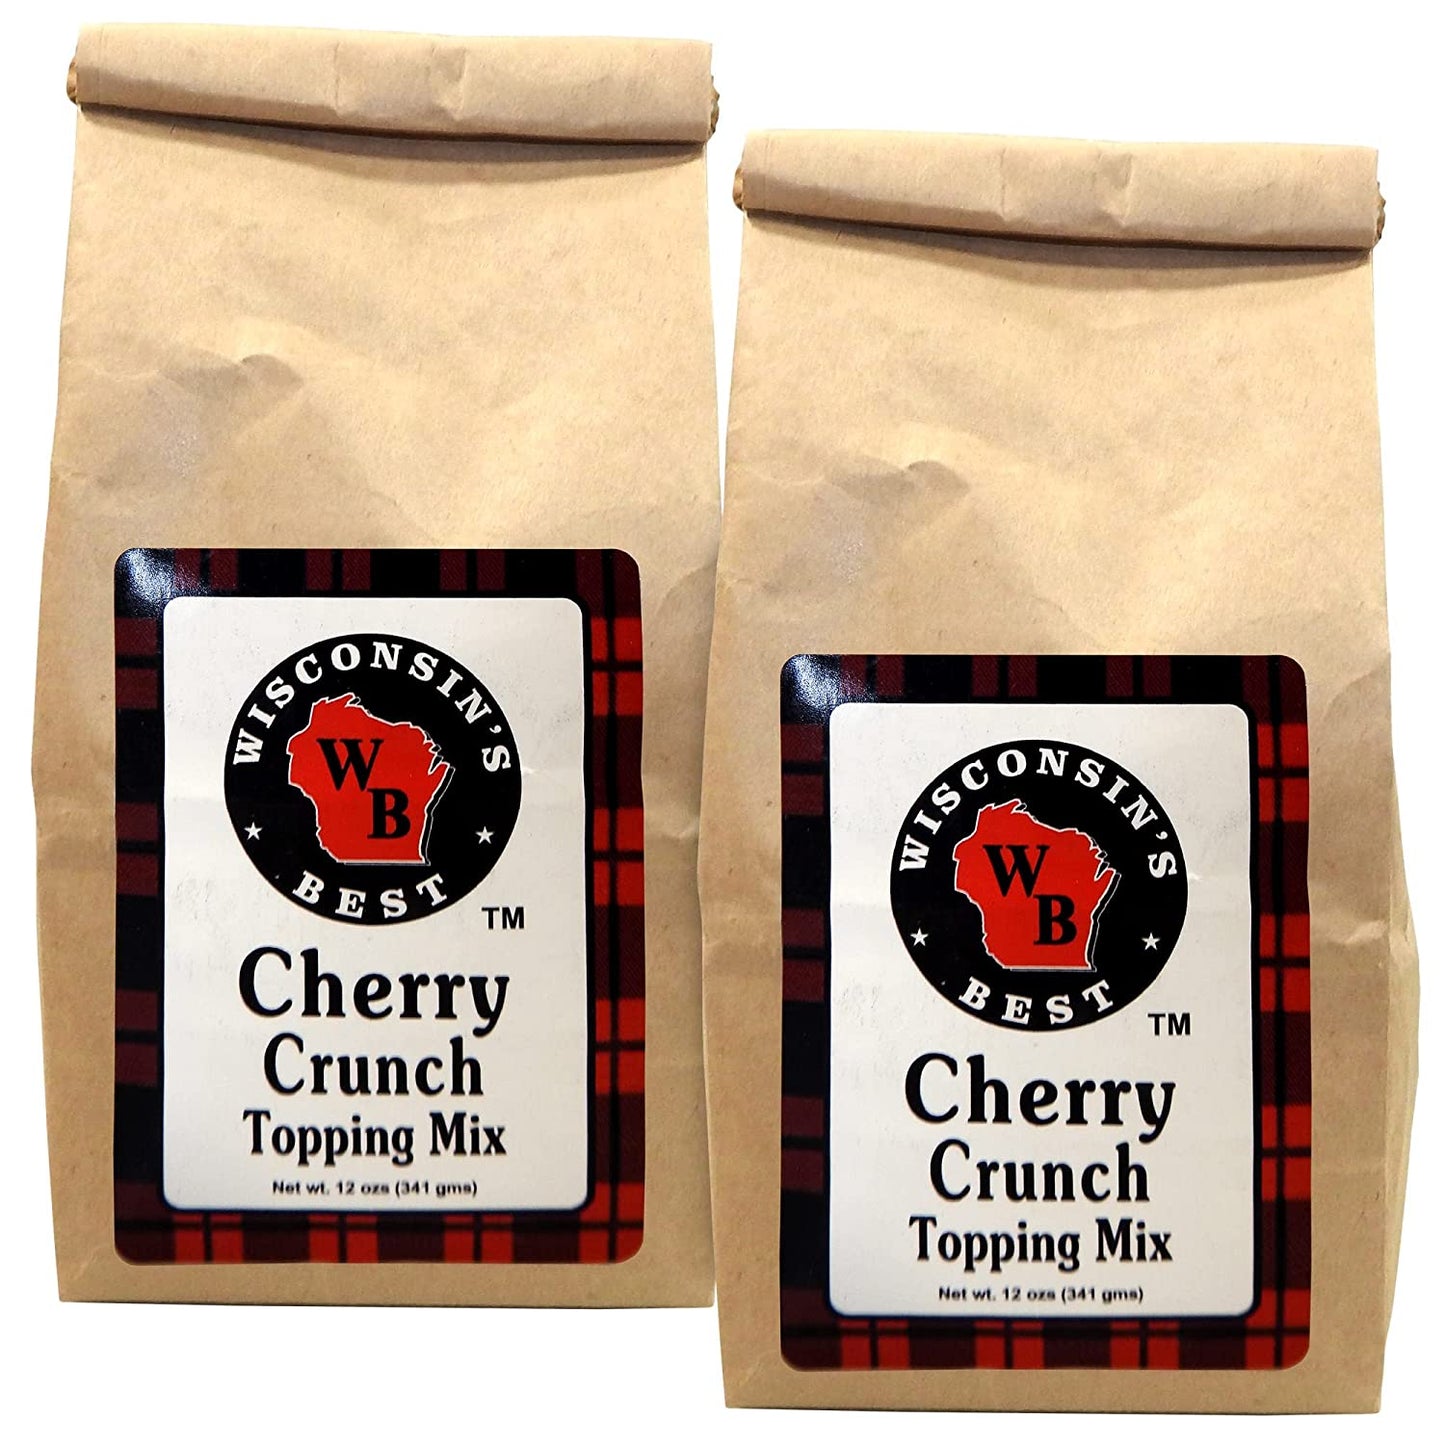 Wisconsin's Best Cherry Crunch Topping Mix